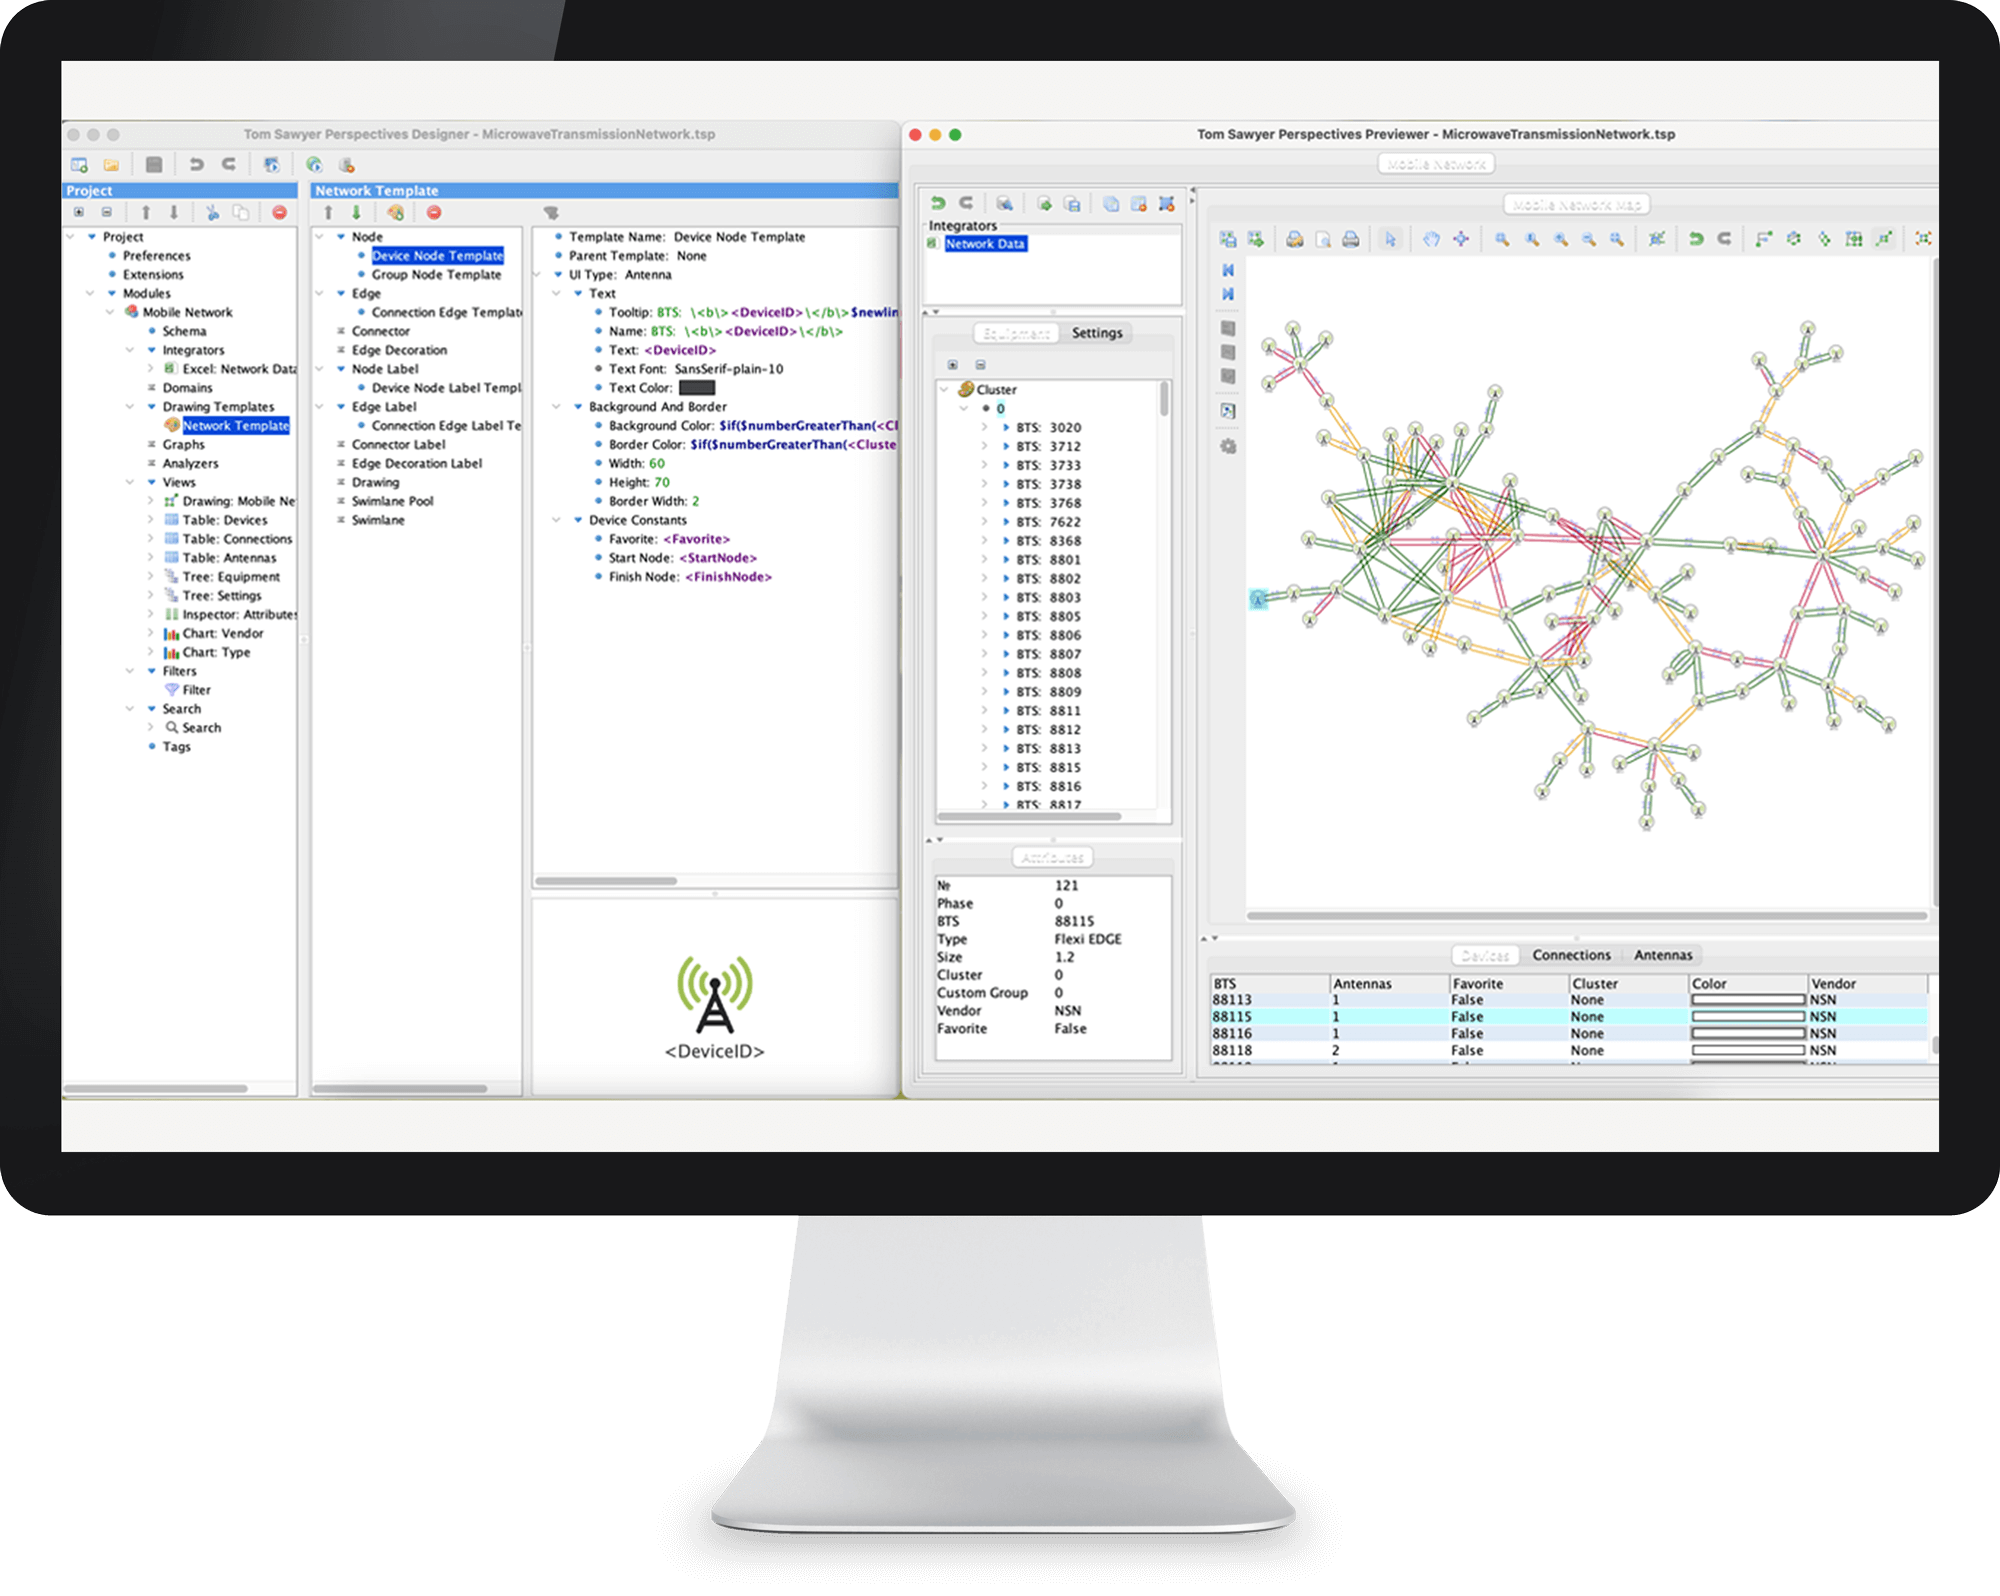 Perspectives is a low-code graph and data visualization development platform for building data-oriented applications fast. 